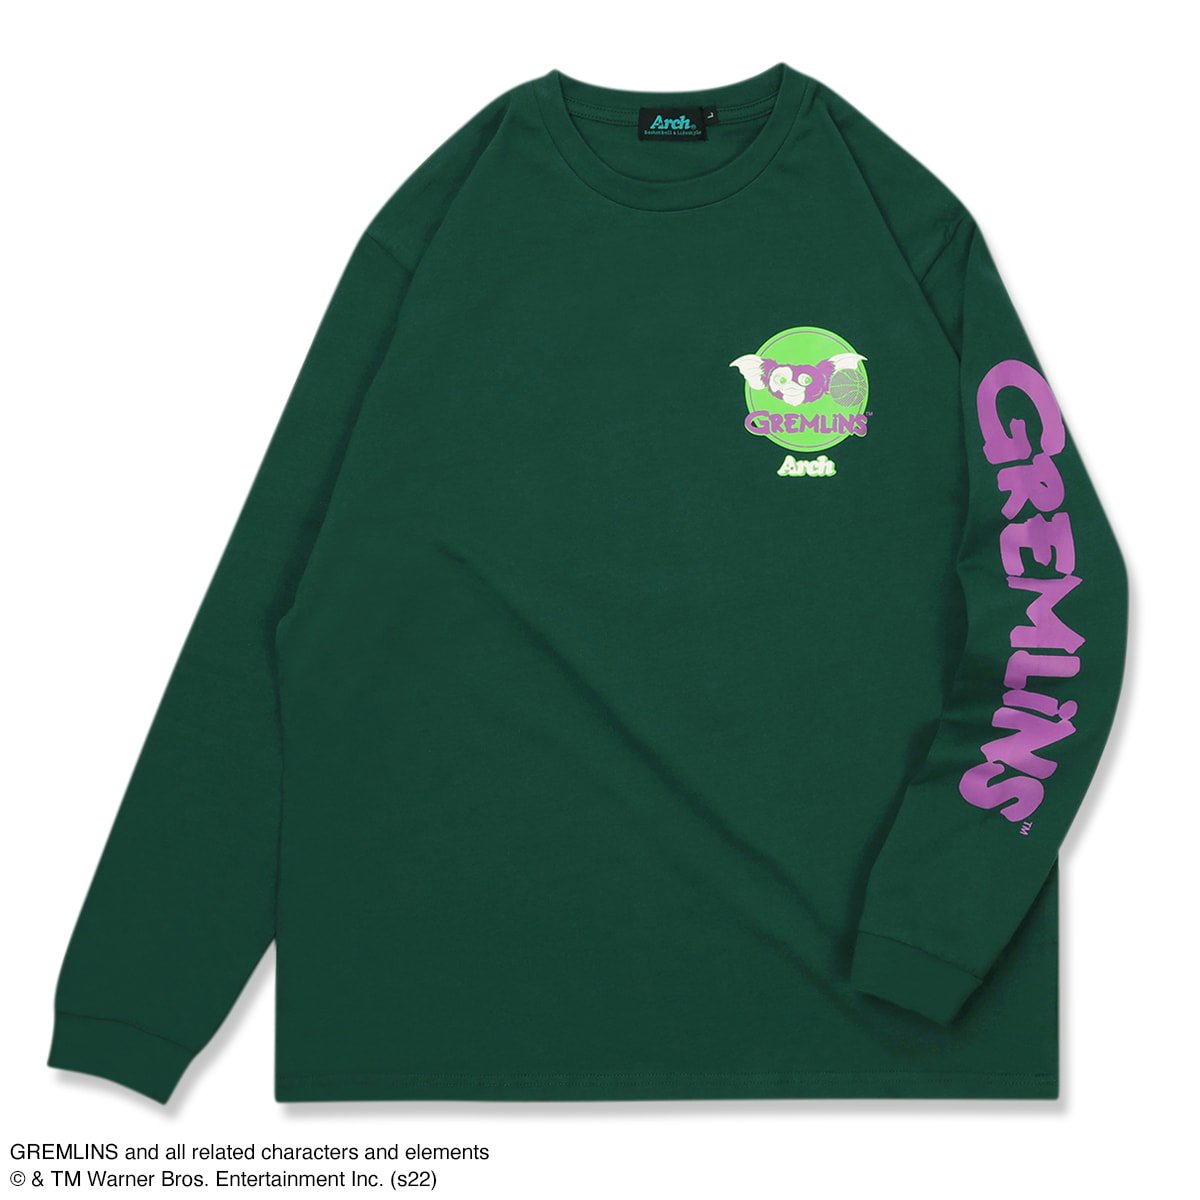 GREMLINS | Arch happy holidays L/S tee【green】 - Arch ☆ アーチ